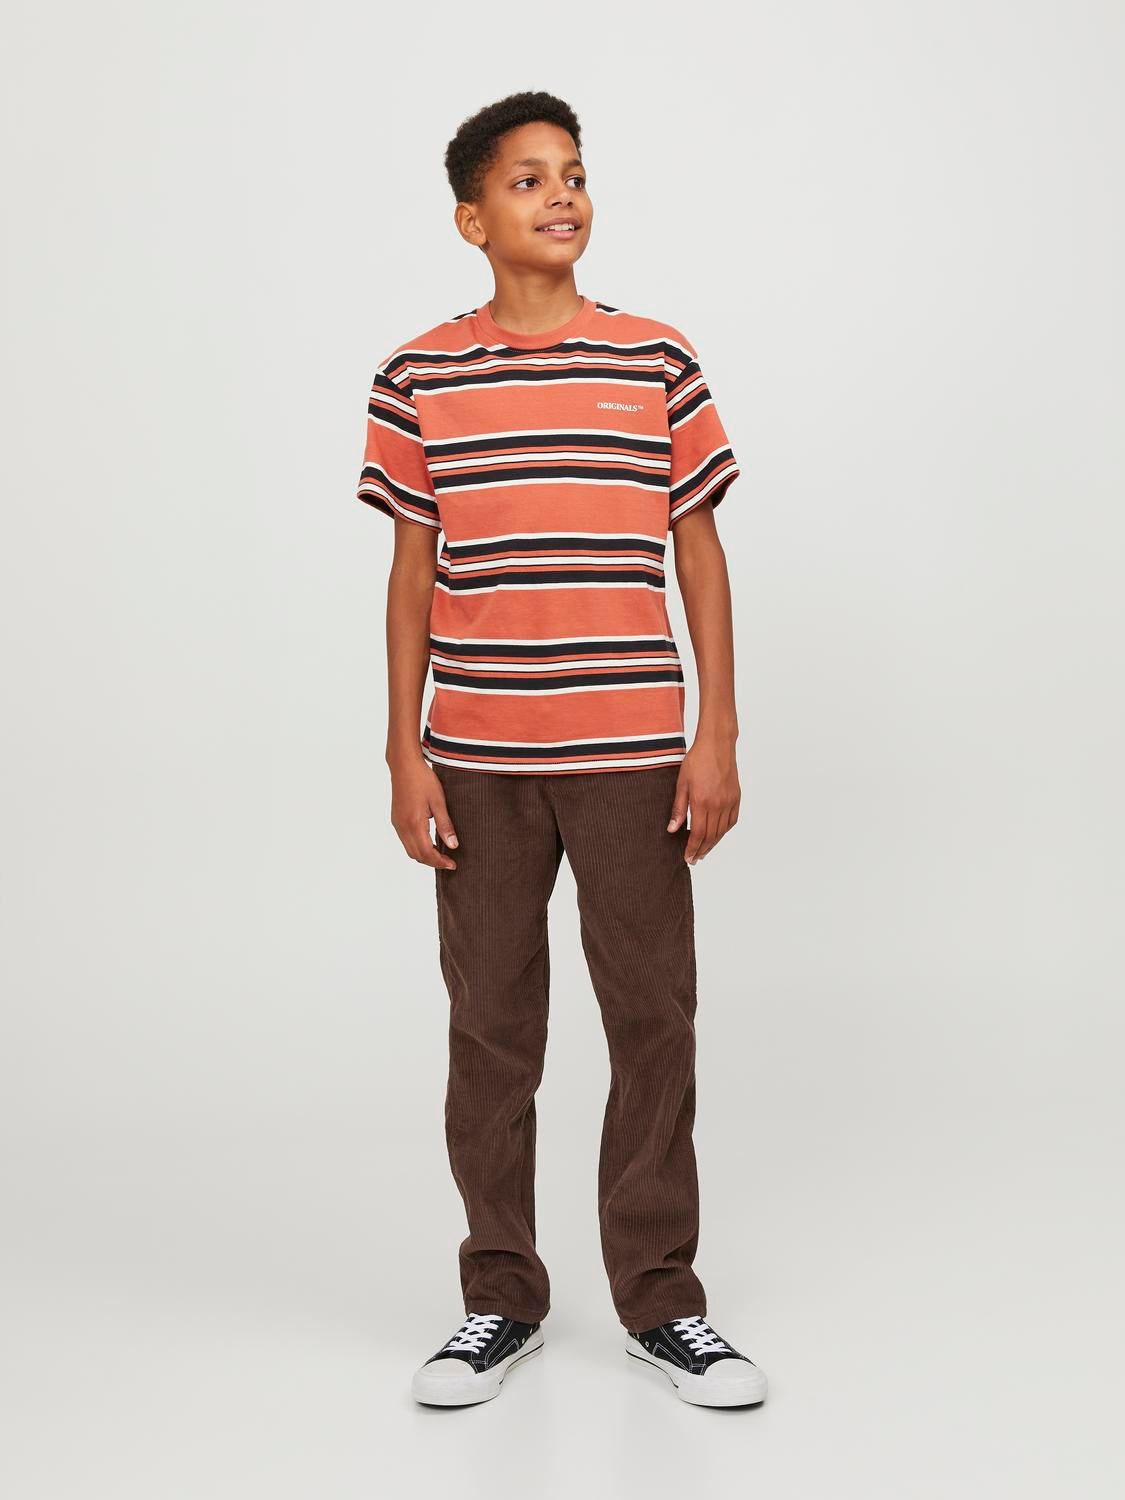 Striped T-shirt For boys